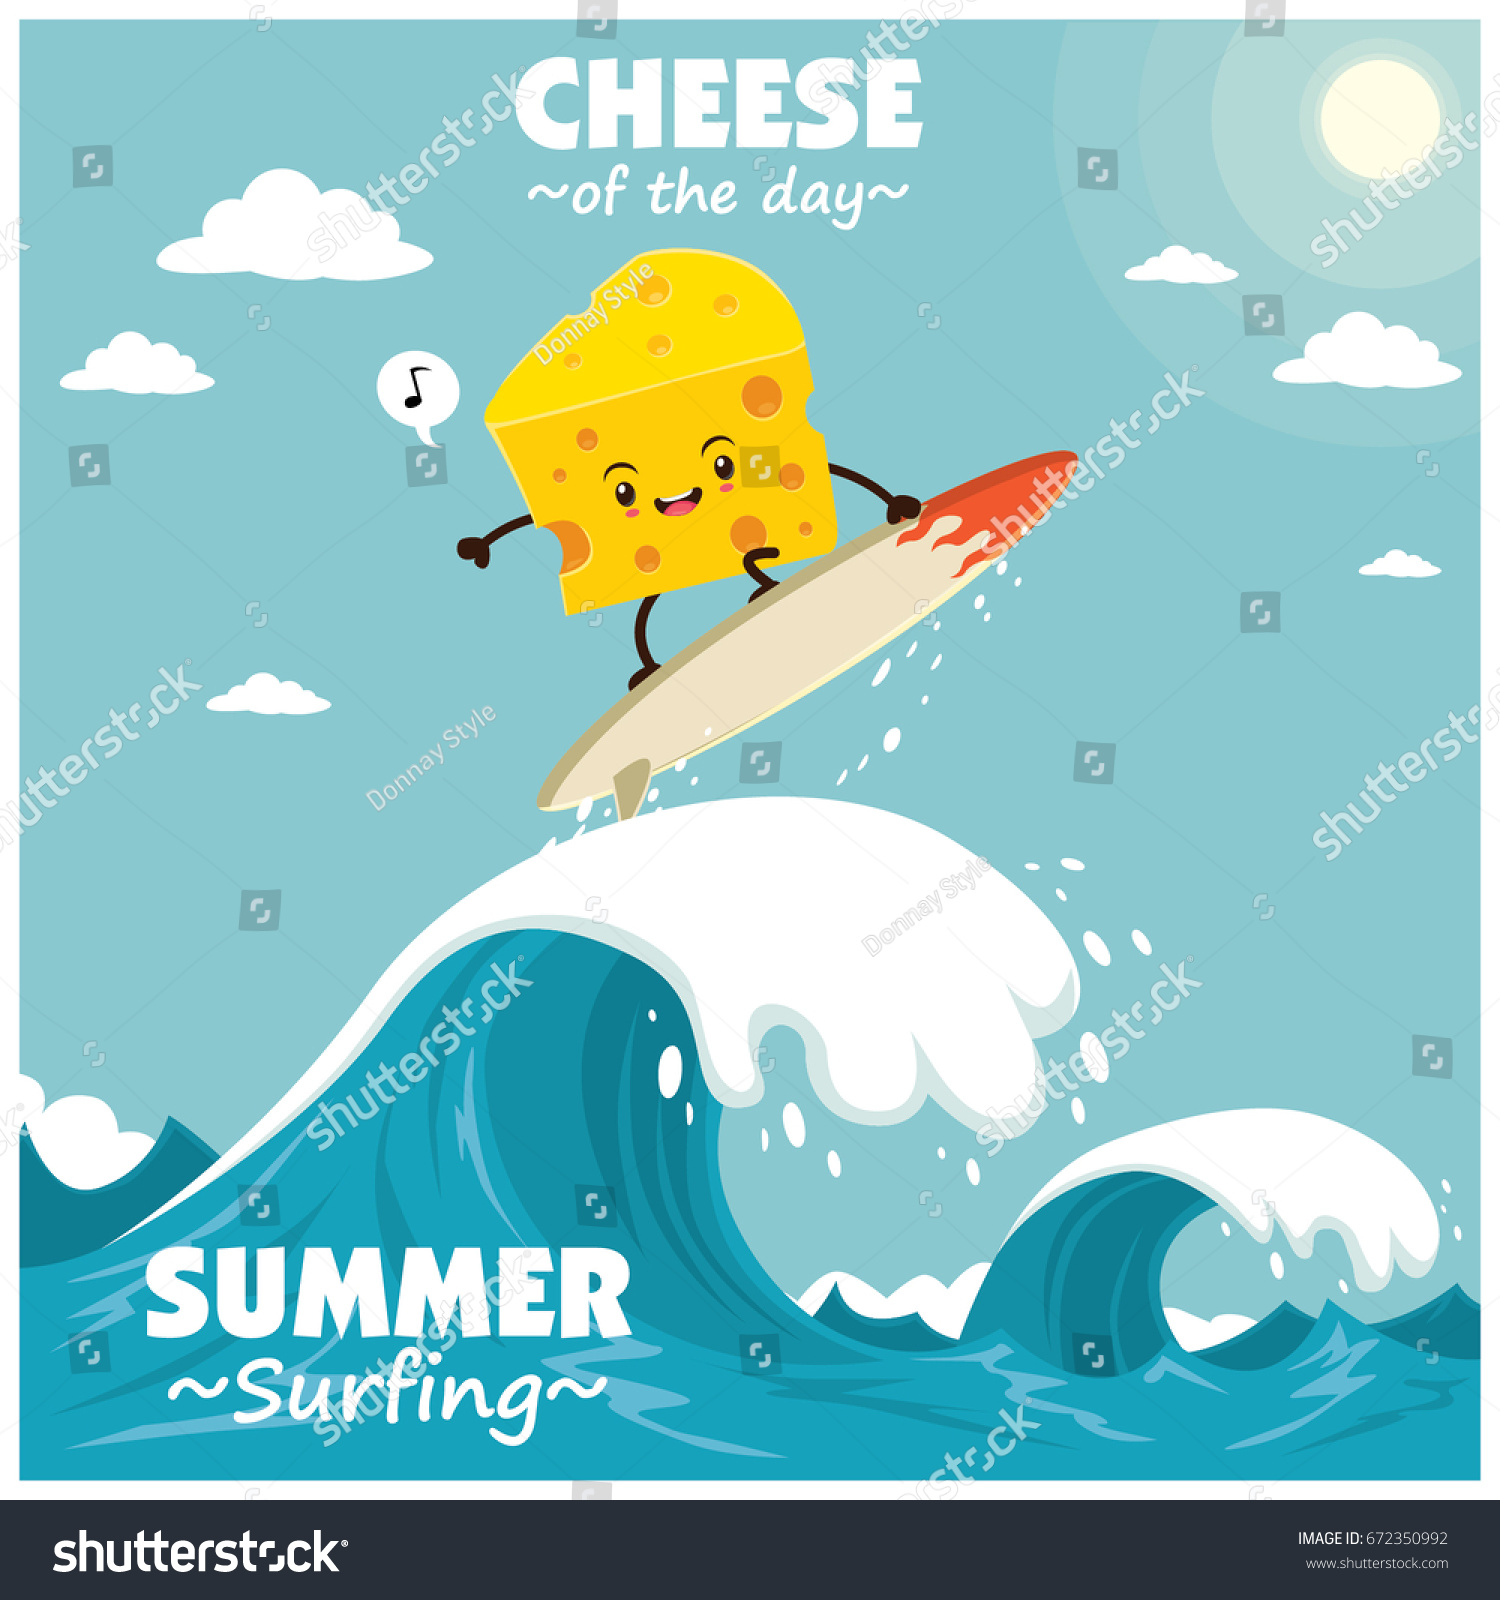 SVG of Vintage food poster design with vector cheese surfer.  svg